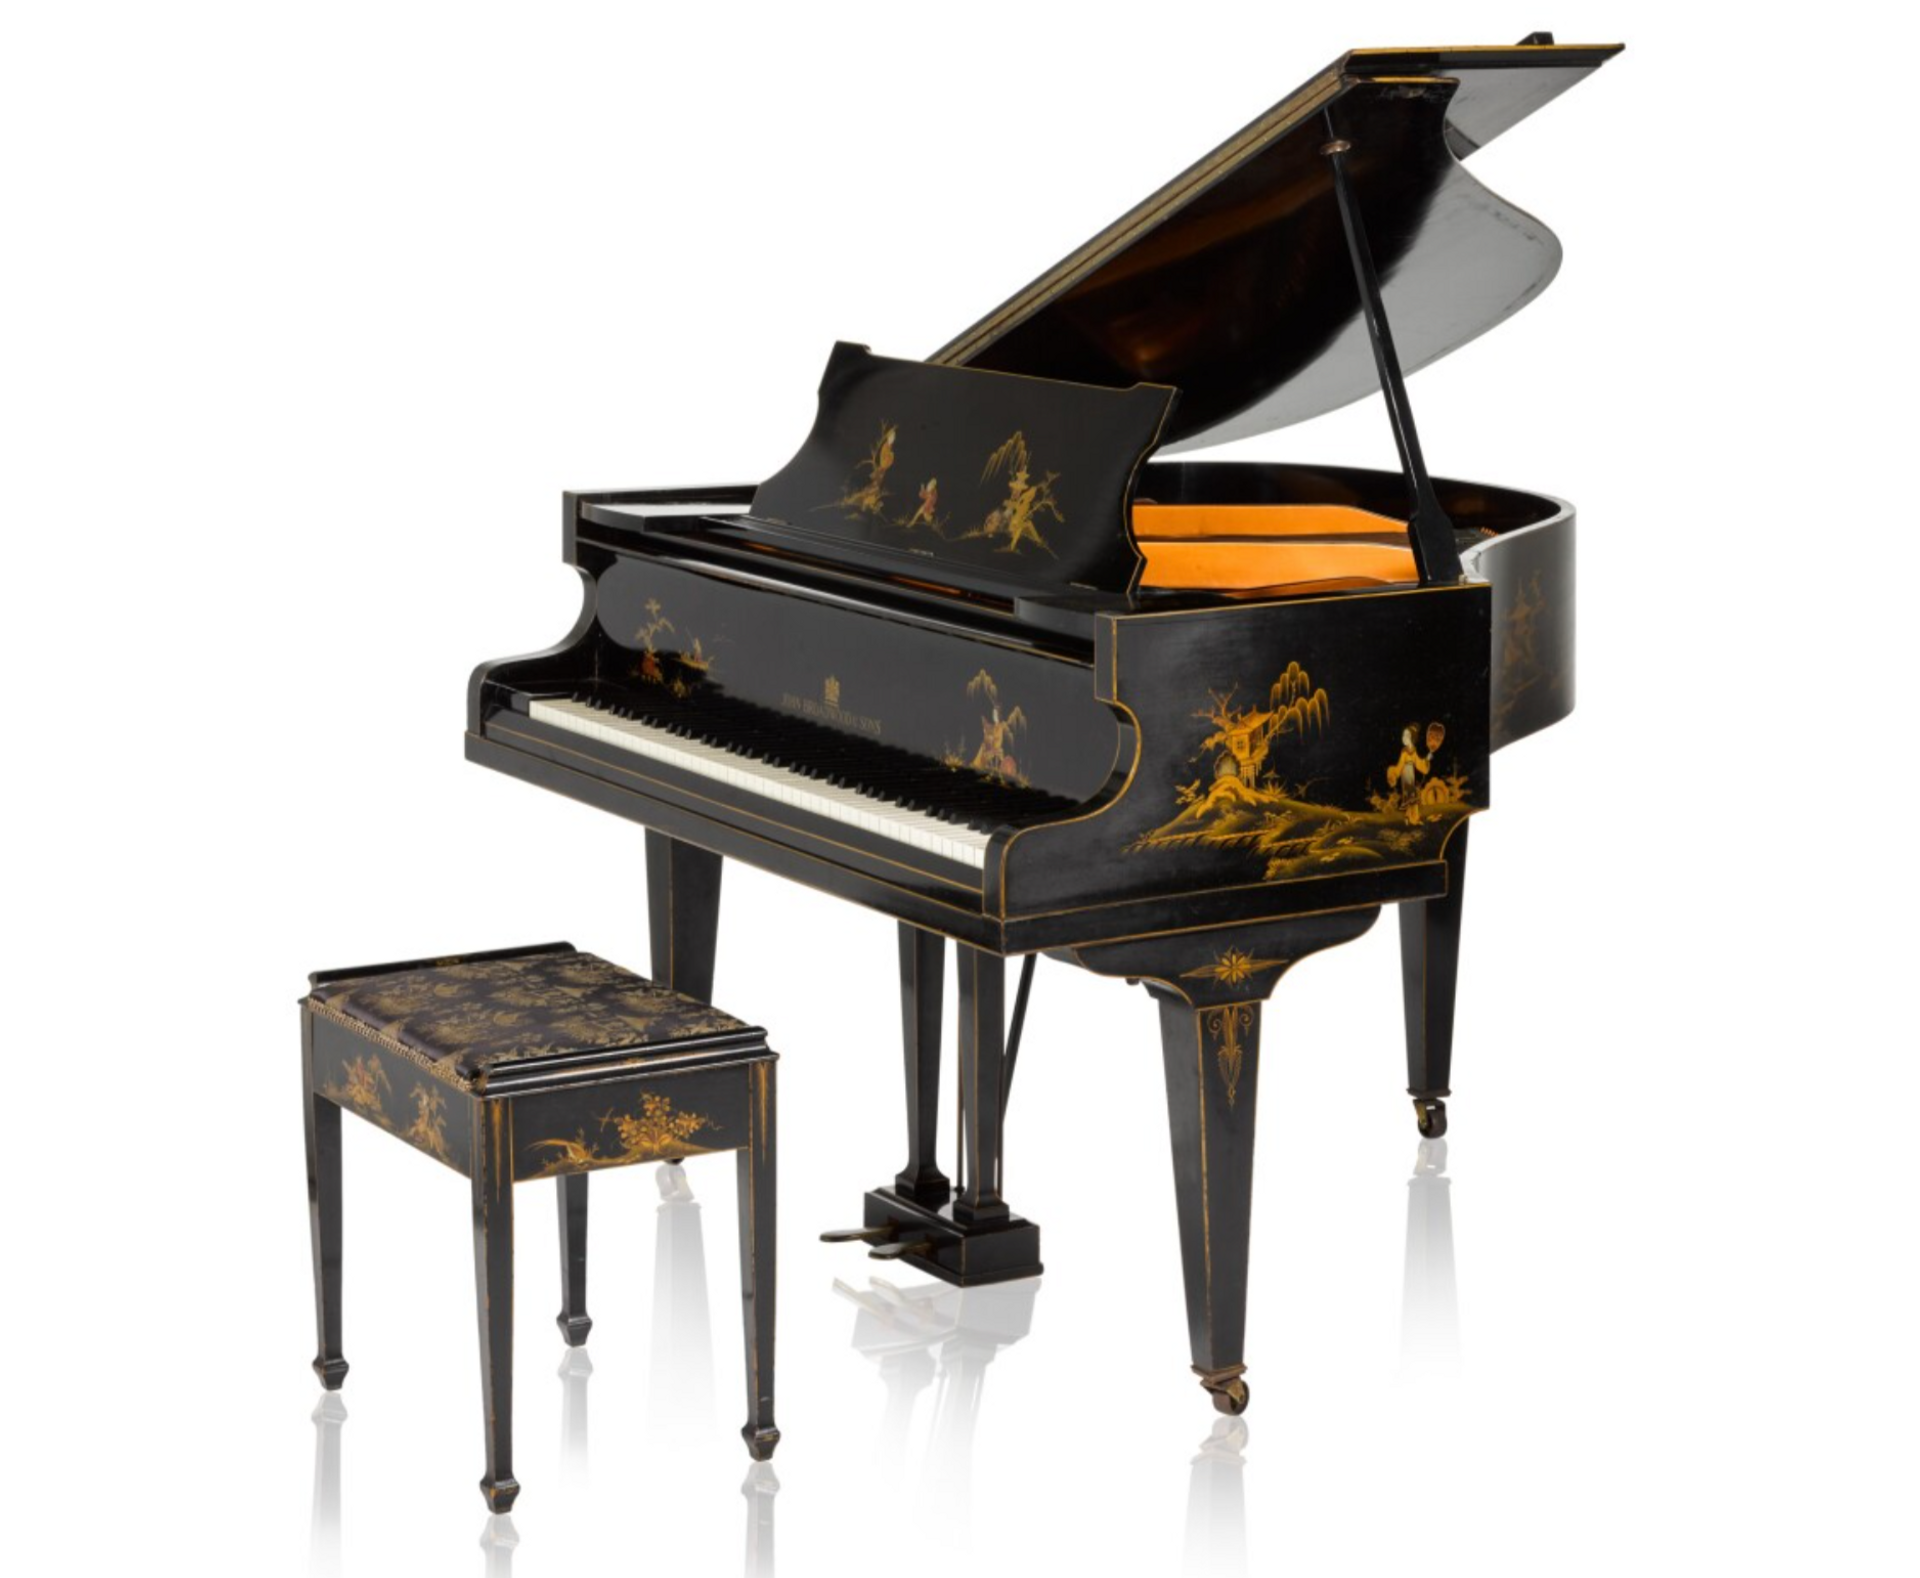 A grand piano in a black lacquered and chinoiserie case by John Broadwood & Sons, owned by Freddie Mercury.